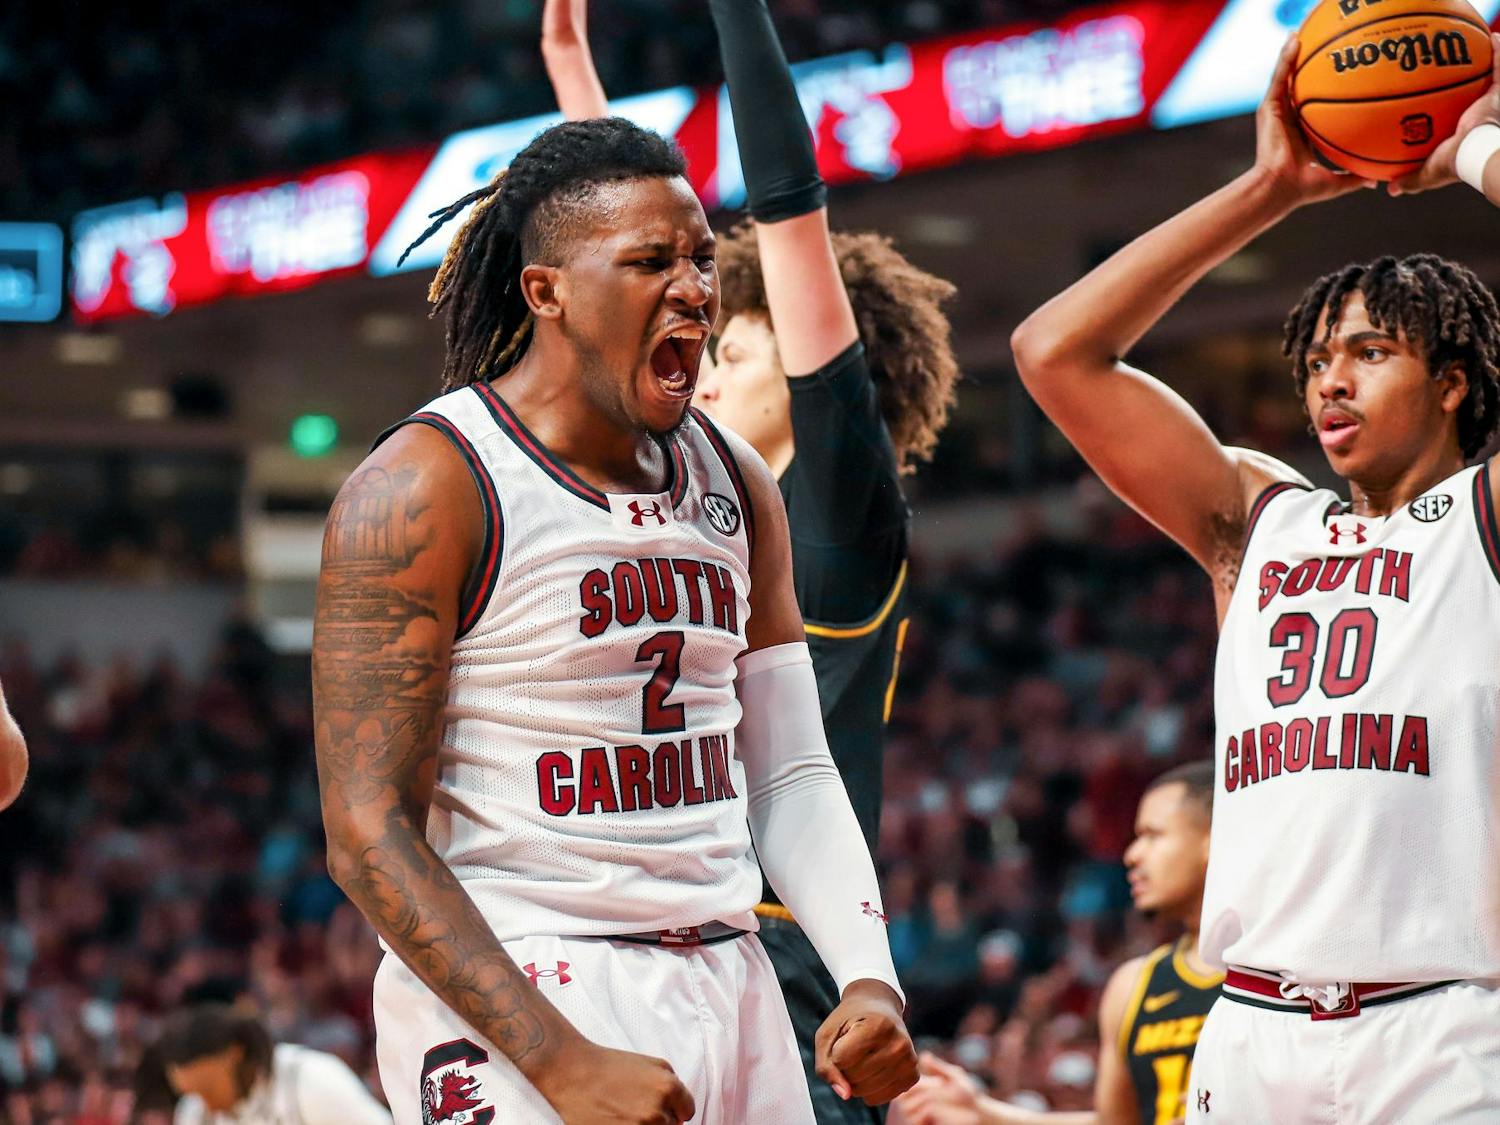 Graduate student forward B.J. Mack celebrates during South Carolina's matchup against Missouri at Colonial Life Arena on Jan. 27, 2024. Mack scored 21 points during the Gamecocks' 72-64 victory over the Tigers.